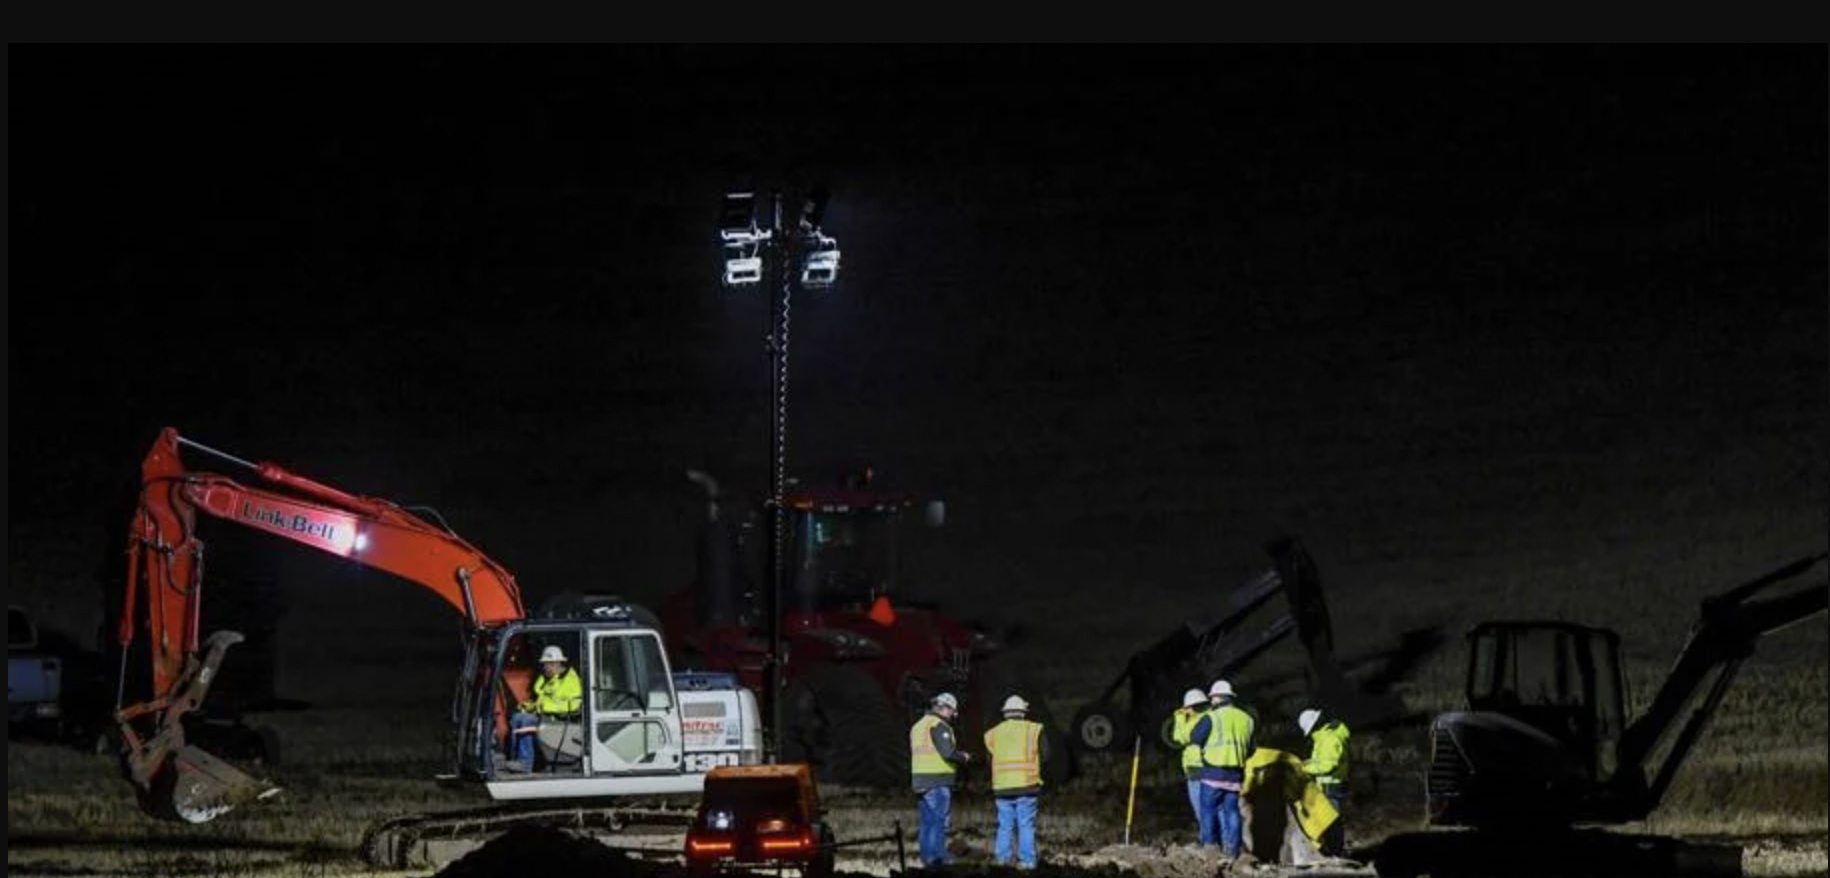 A crew works on a ruptured gas line along U.S. Highway 195 north of Pullman Wednesday night. (Credit: Liesbeth Powers / Daily News)